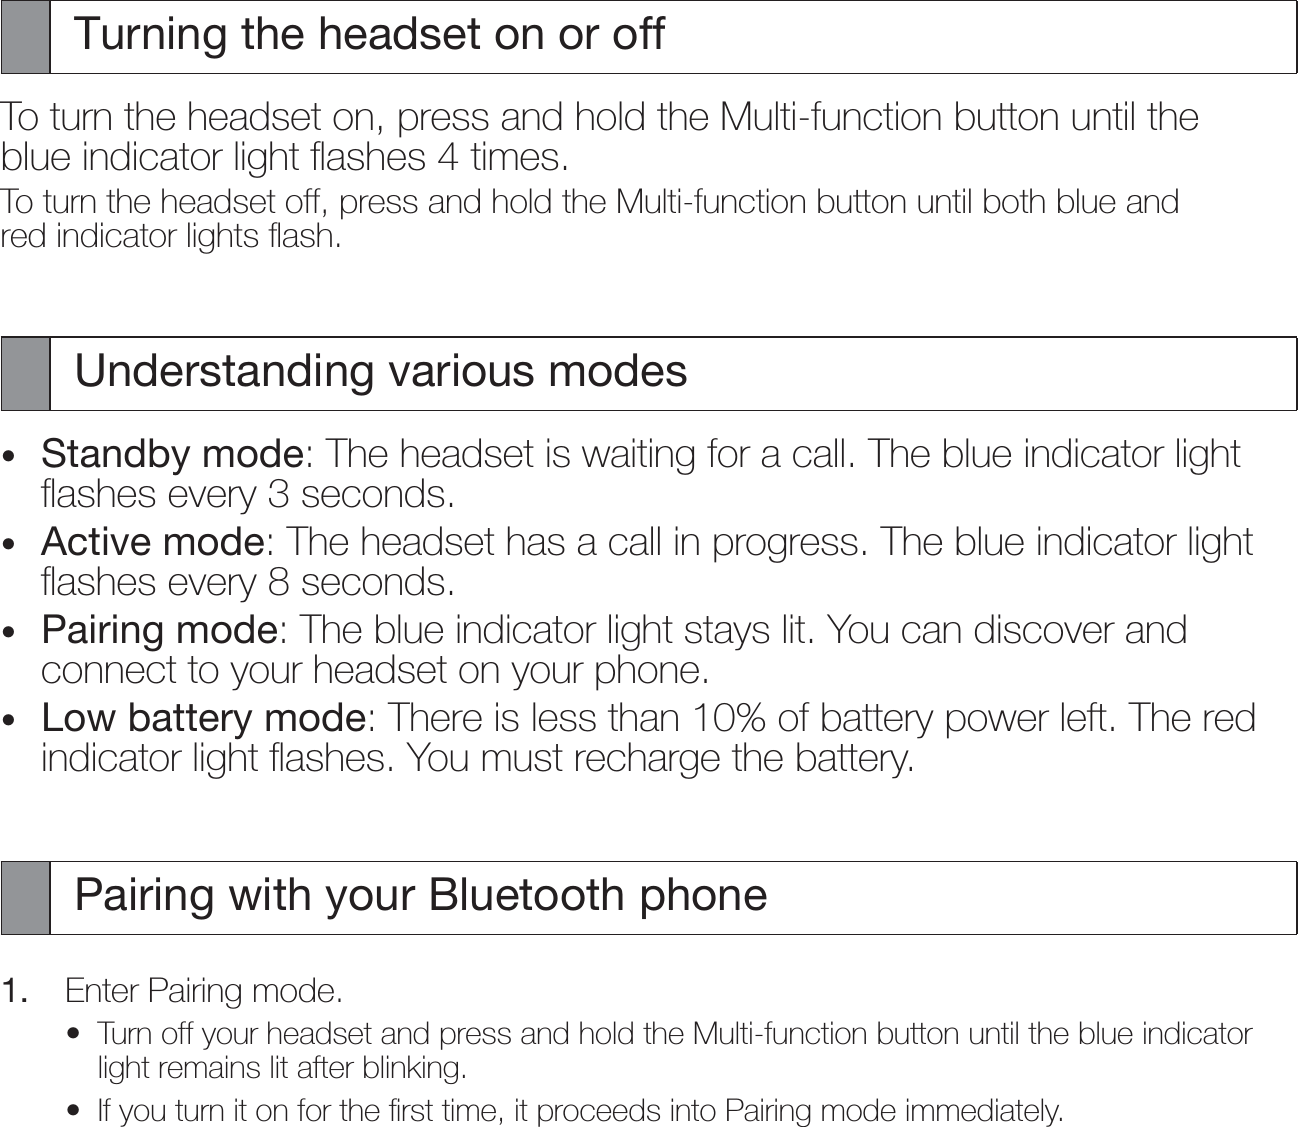 Turning the headset on or offTo turn the headset on, press and hold the Multi-function button until the blue indicator light ﬂashes 4 times.To turn the headset off, press and hold the Multi-function button until both blue and red indicator lights ﬂash.Understanding various modesStandby mode: The headset is waiting for a call. The blue indicator light ﬂashes every 3 seconds.Active mode: The headset has a call in progress. The blue indicator light ﬂashes every 8 seconds.Pairing mode: The blue indicator light stays lit. You can discover and connect to your headset on your phone.Low battery mode: There is less than 10% of battery power left. The red indicator light ﬂashes. You must recharge the battery.Pairing with your Bluetooth phone1.  Enter Pairing mode.Turn off your headset and press and hold the Multi-function button until the blue indicator light remains lit after blinking.If you turn it on for the ﬁrst time, it proceeds into Pairing mode immediately.••••••